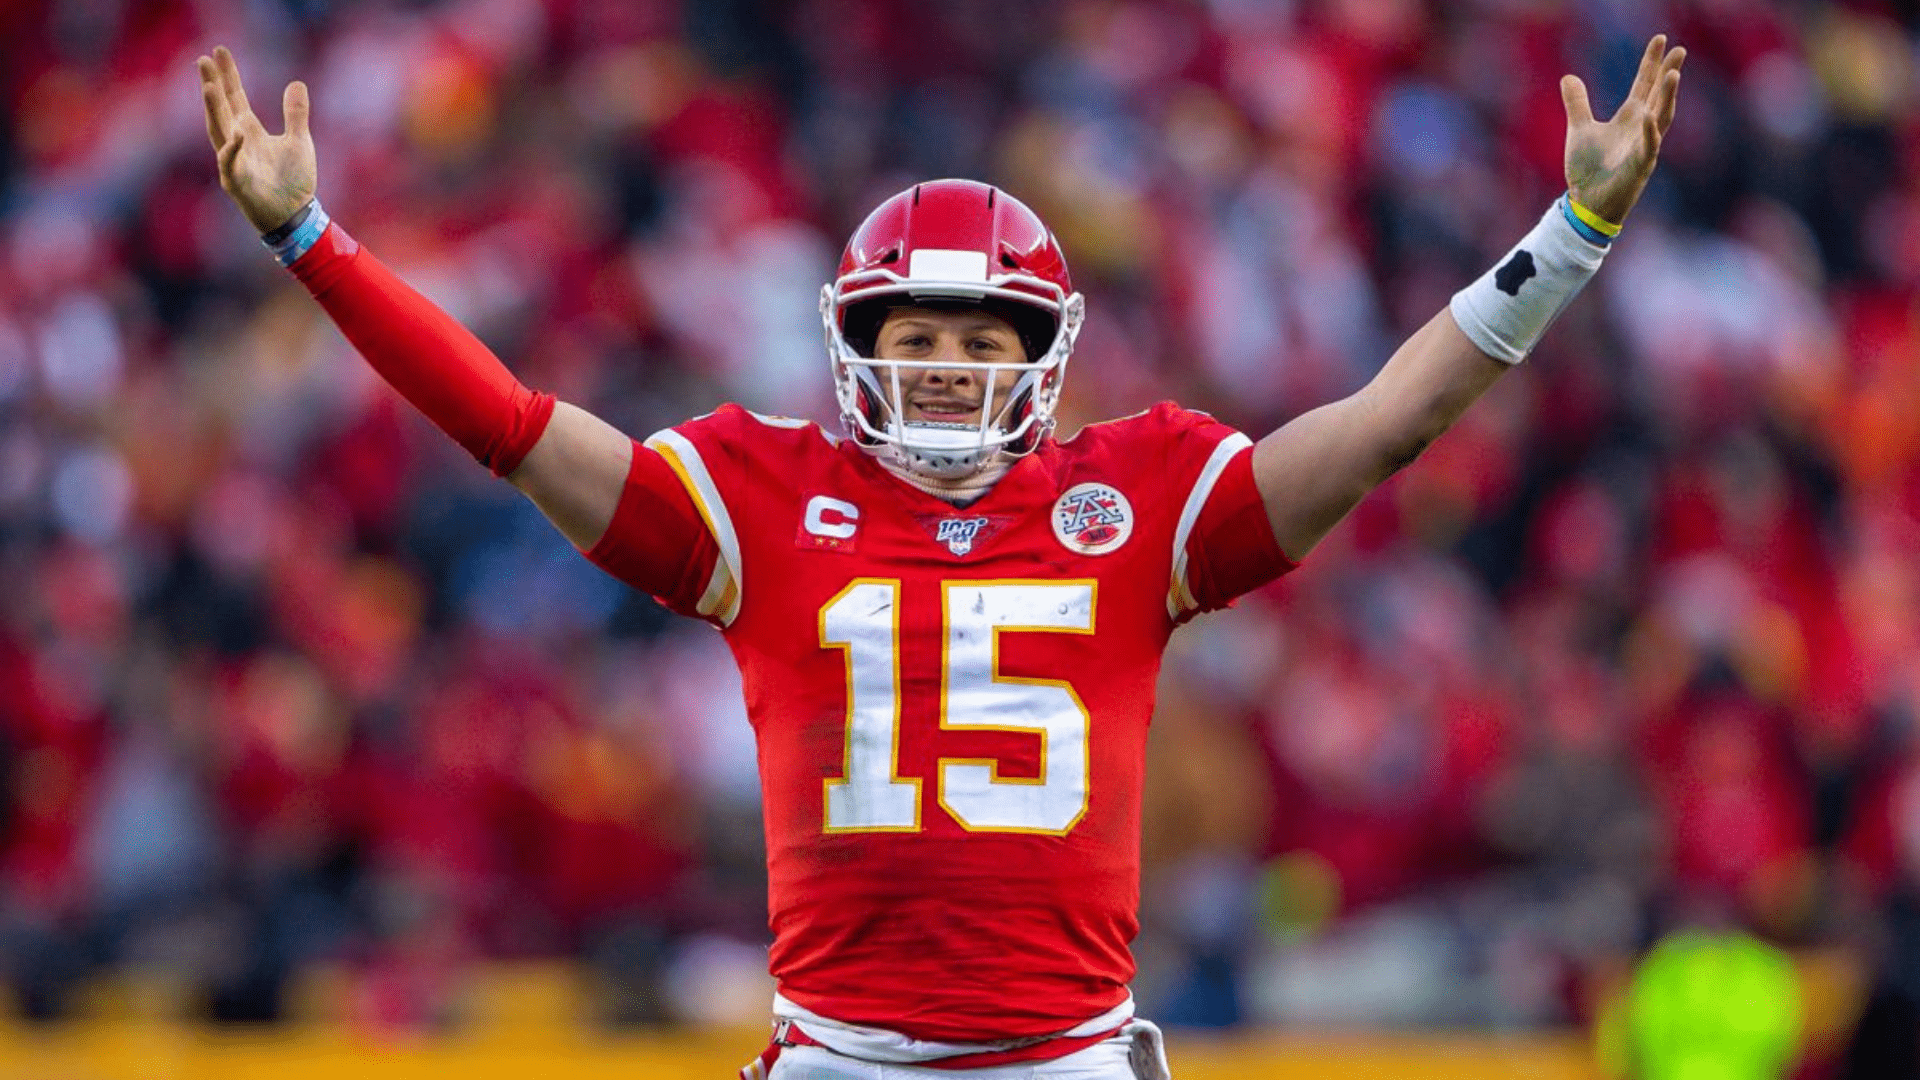 Patrick Mahomes Invests in ASB (2nd Largest Shareholder)